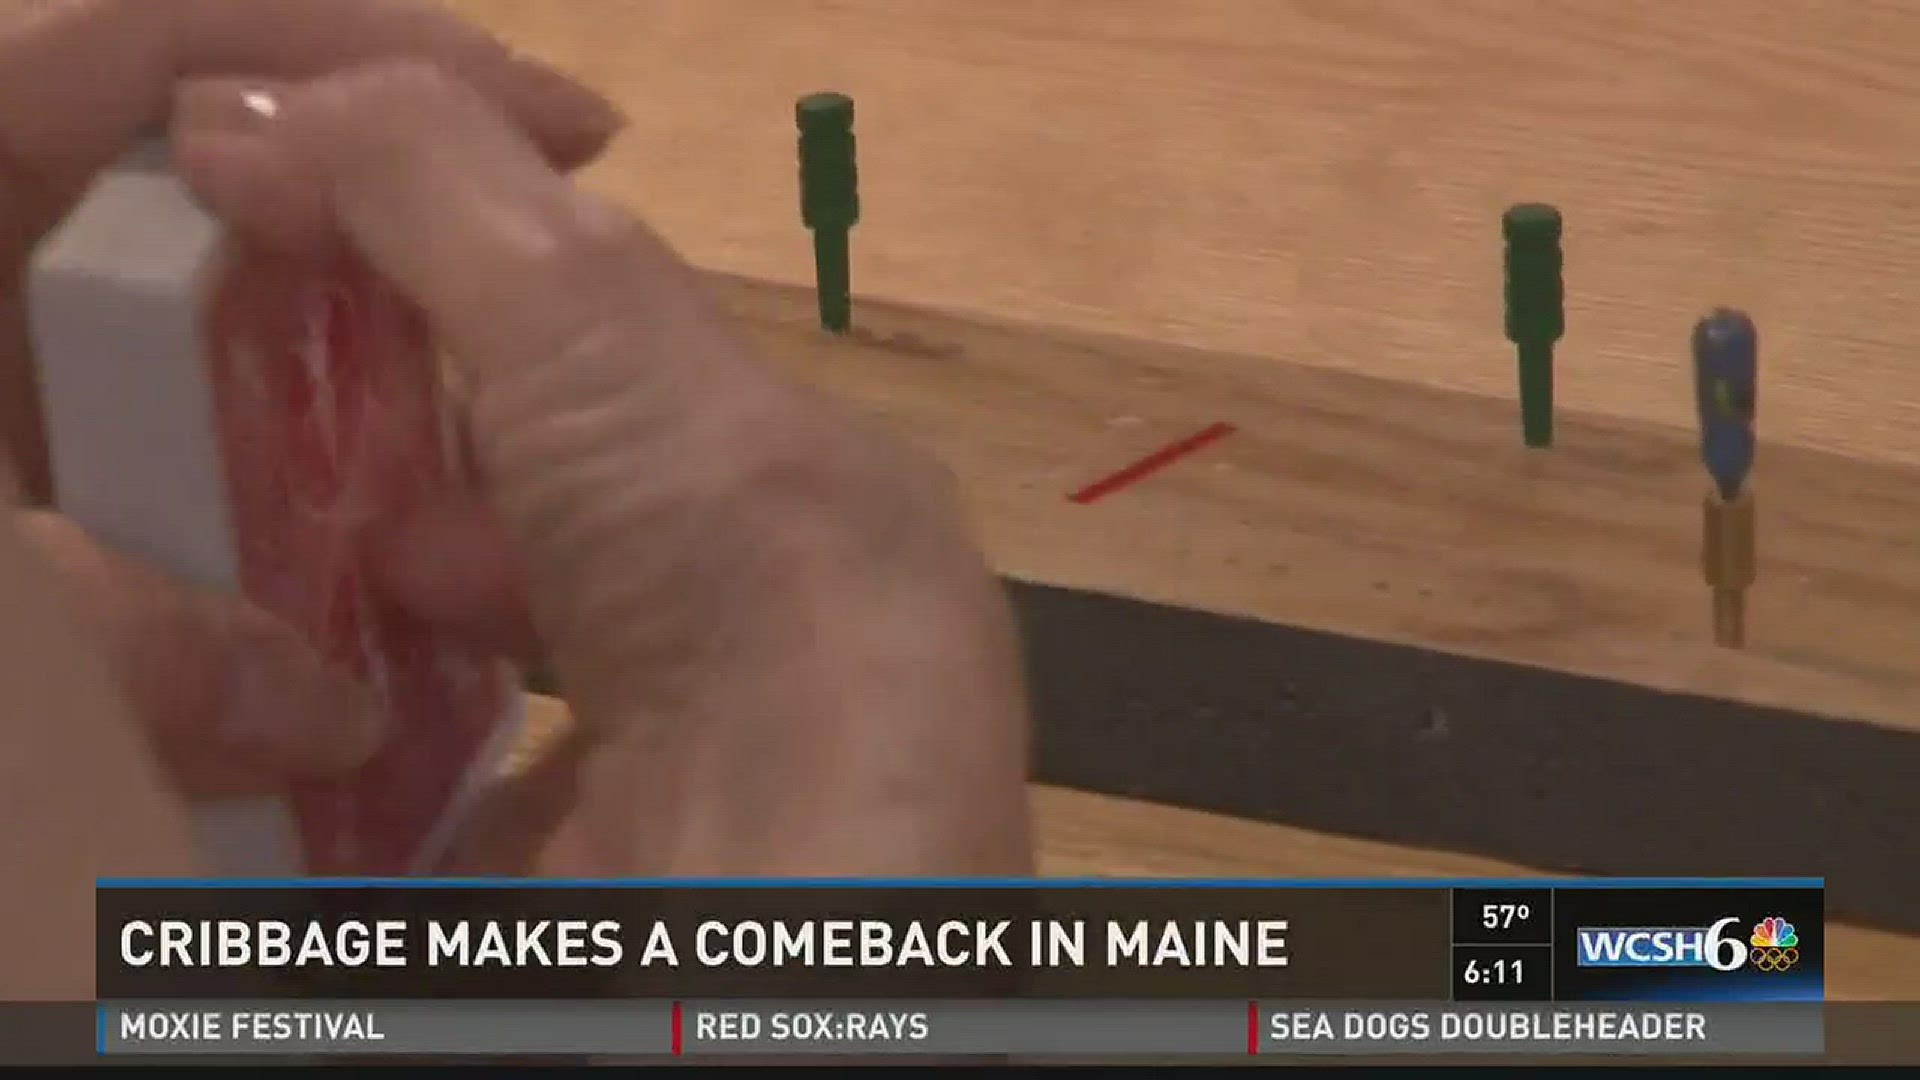 Cribbage makes a comeback in Maine